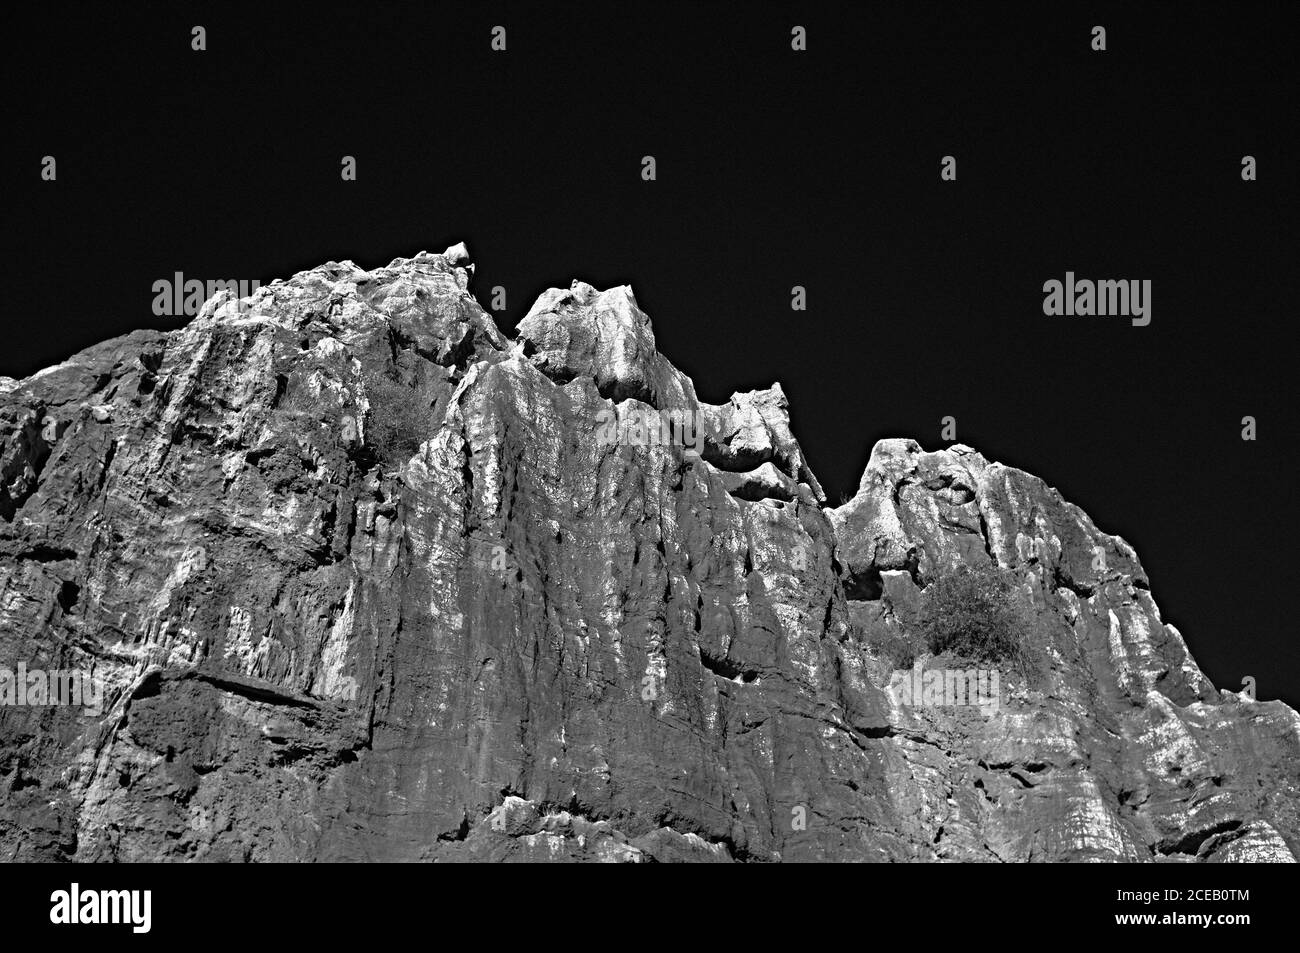 High steep sharp rocks with trees growing at bottom on background of sky in black and white colors Stock Photo